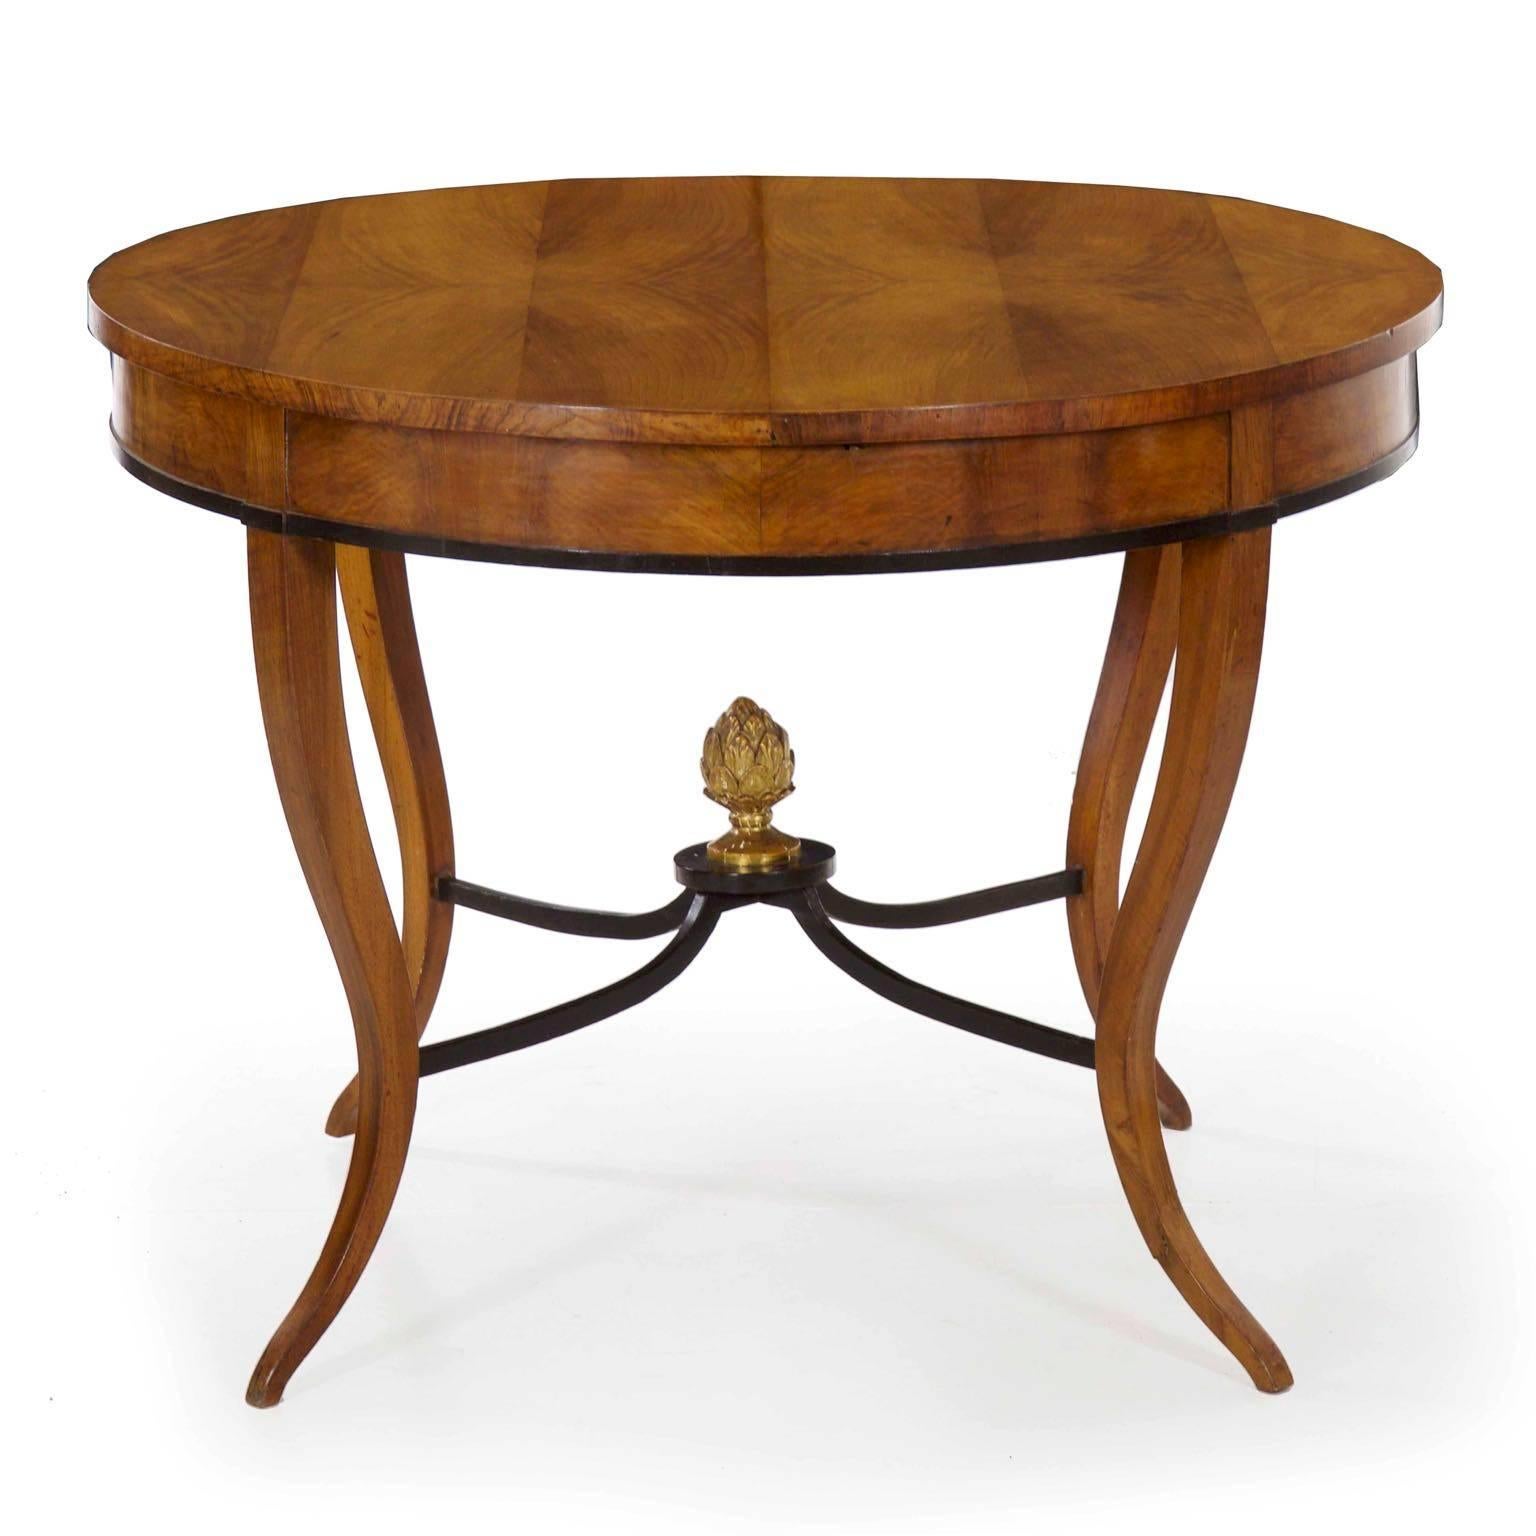 A very elegant form with a lightness of profile that is most admirable, this fine center table exhibits a skilled matching of veneers throughout. The top is arranged in six bookmatched bands of alternating hues of fruitwood, allowing for a stunning